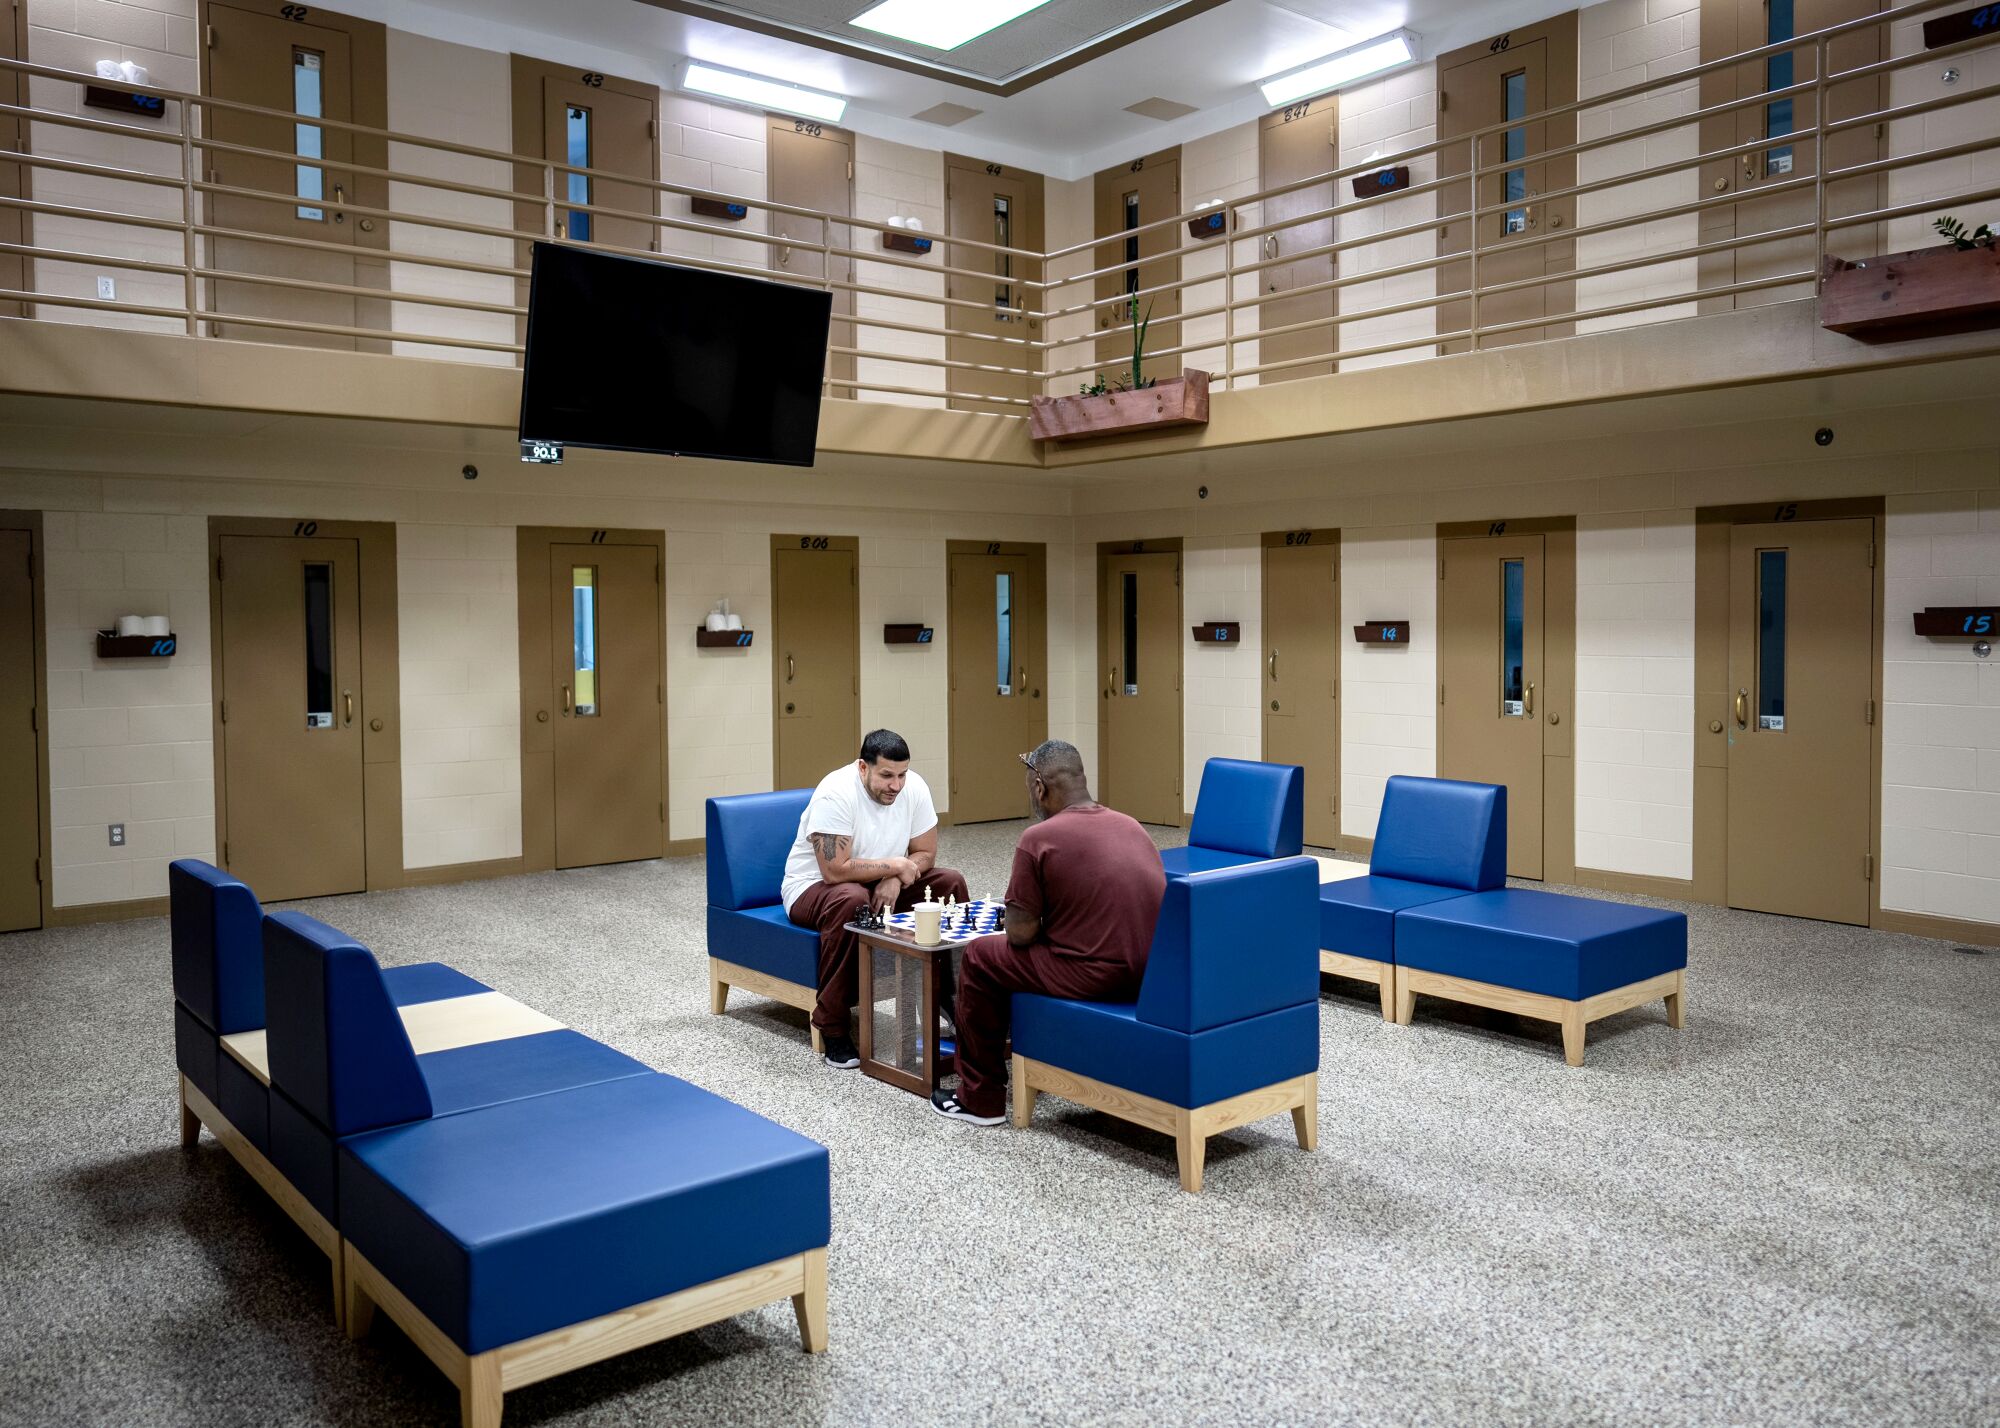 Two inmates sit in the center of a prison block and play chess.  A television is mounted on the railing of the second floor of the cellular units.